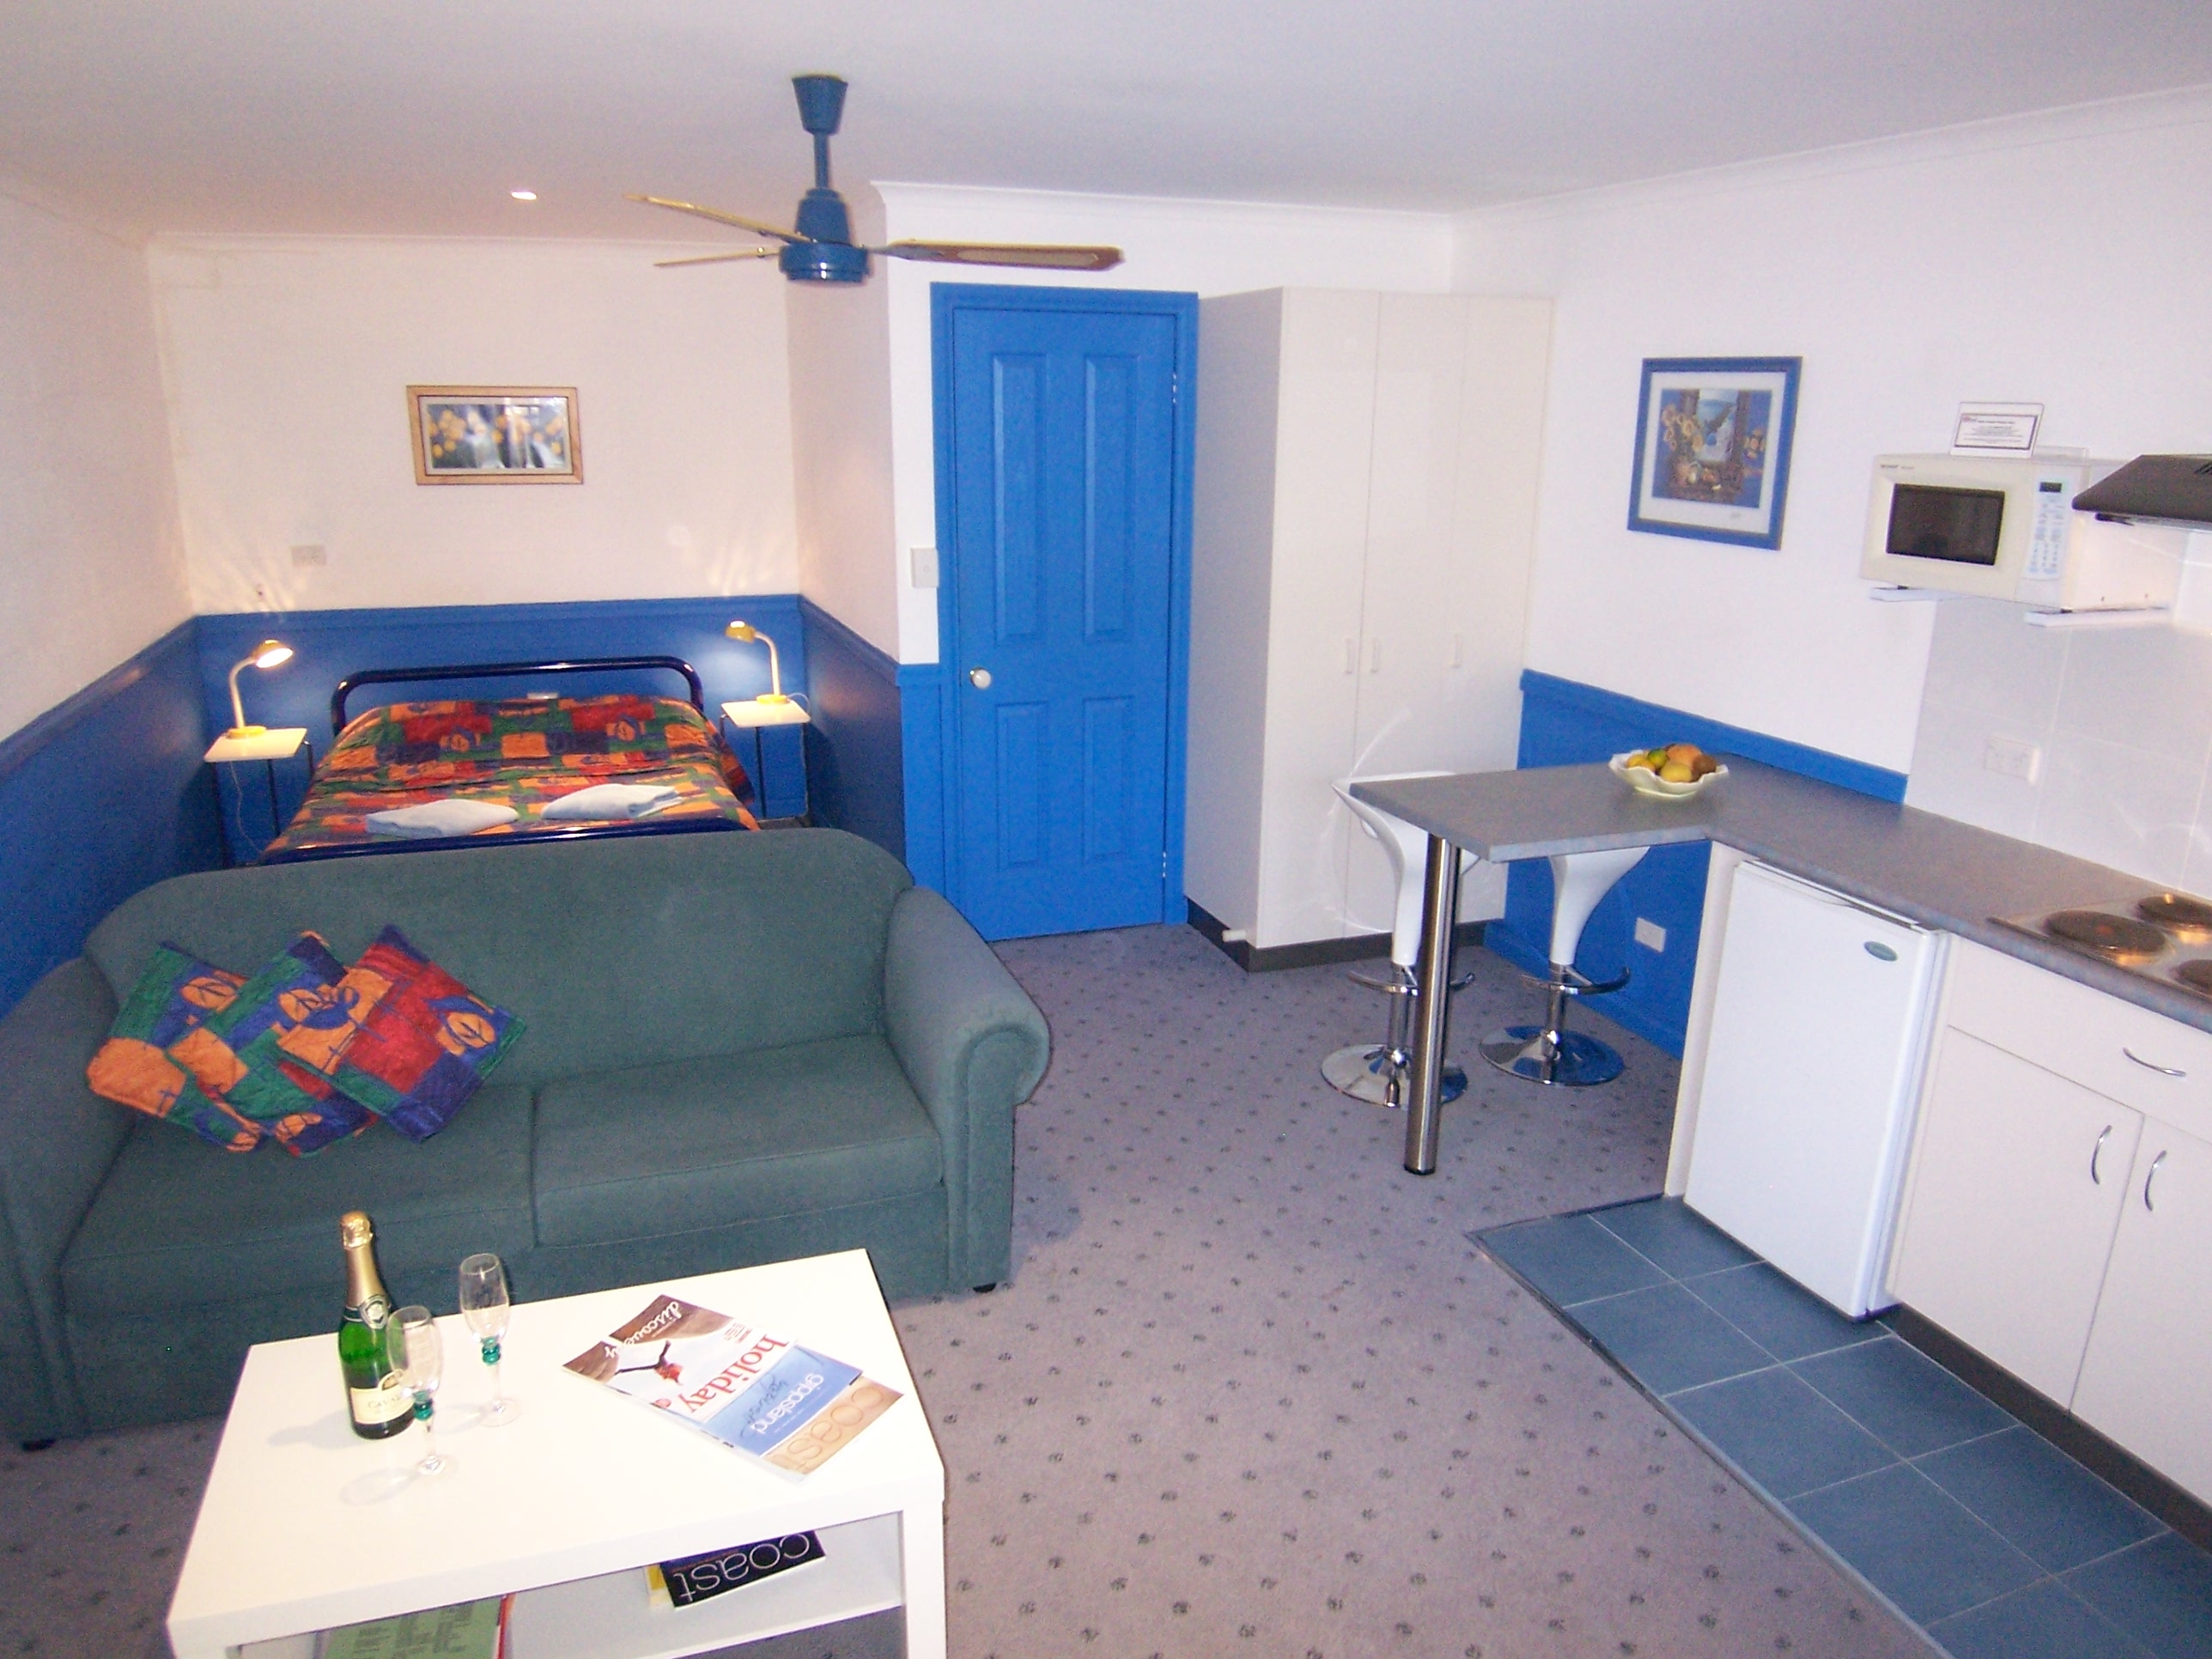 Double bed and sittingroom area